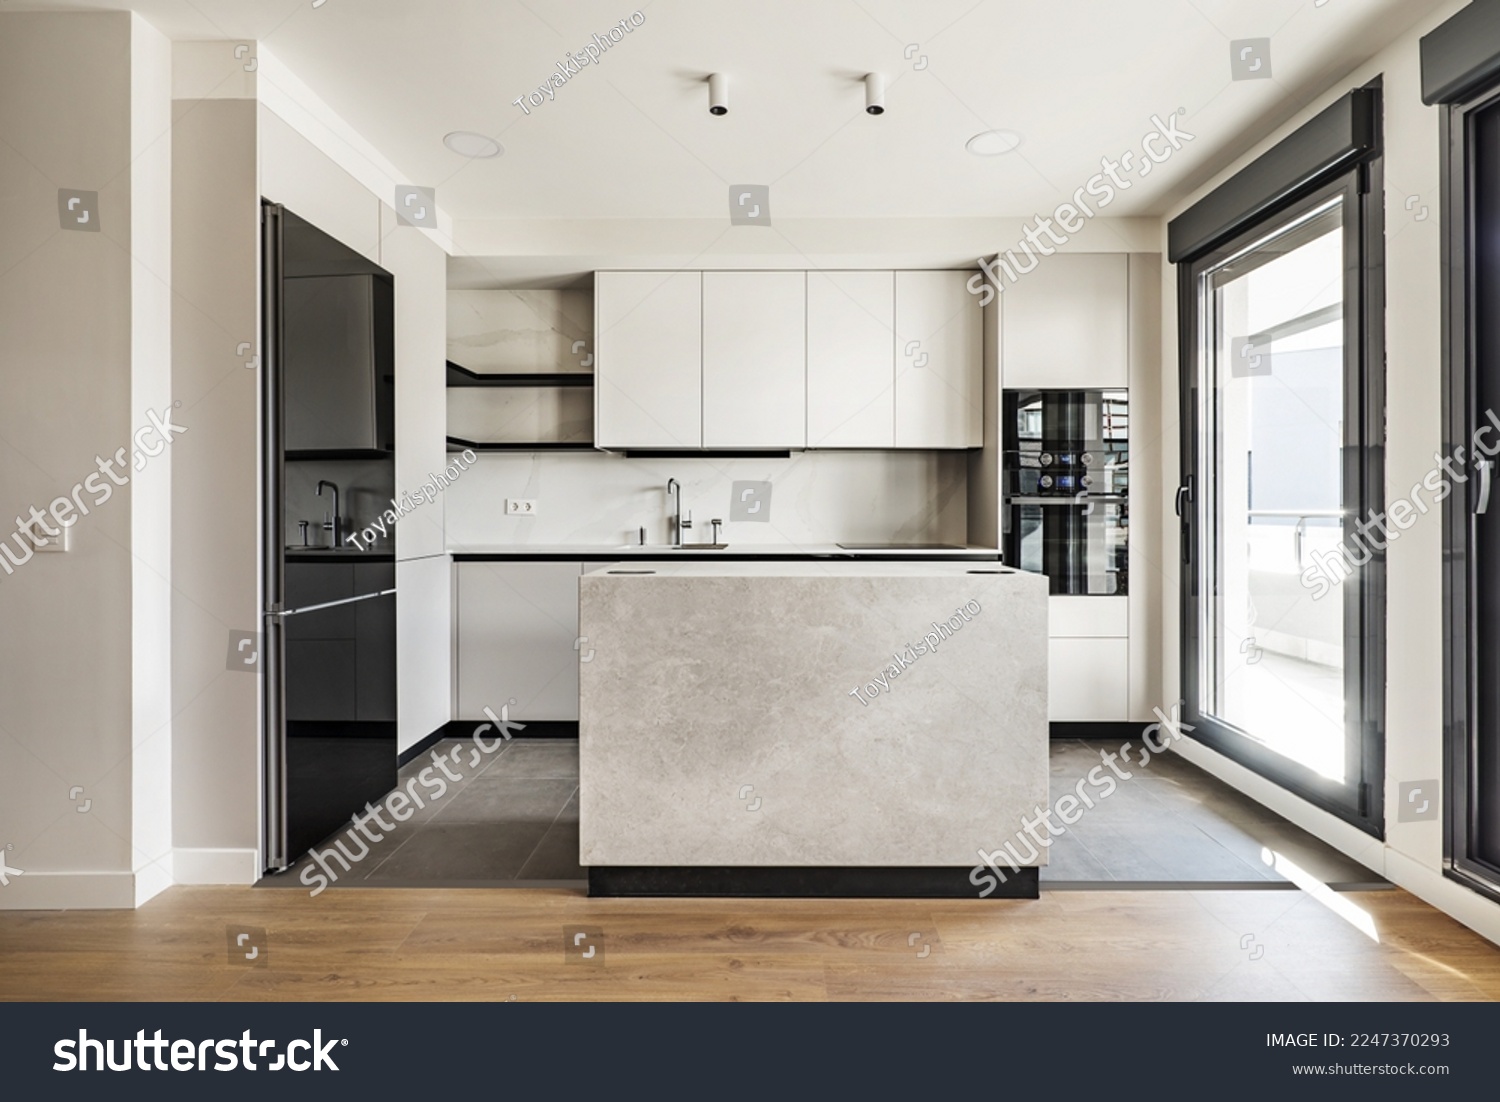 Front view of a modern designer kitchen with smooth handleless cabinets with black edges, black glass appliances, a marble island and marble countertops #2247370293